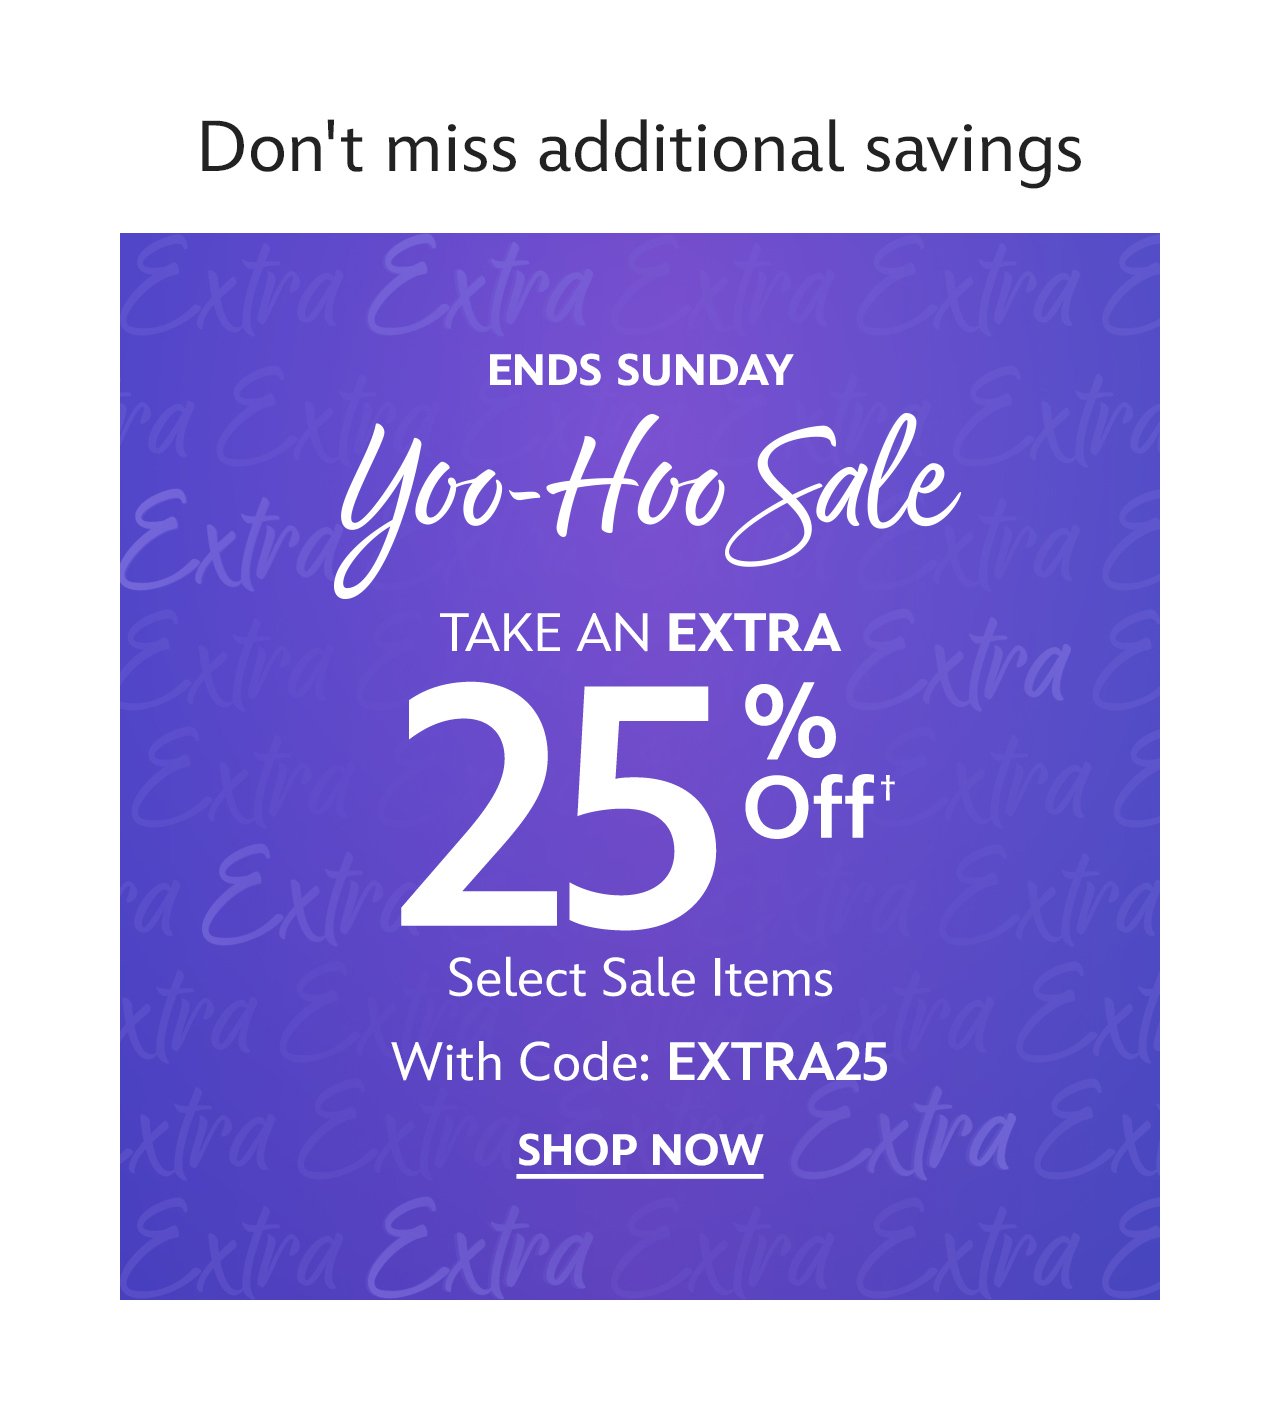 Save more on sale items. Ends Sunday. Extra 25% Off. With Code: EXTRA25 | Select Items| Shop Now